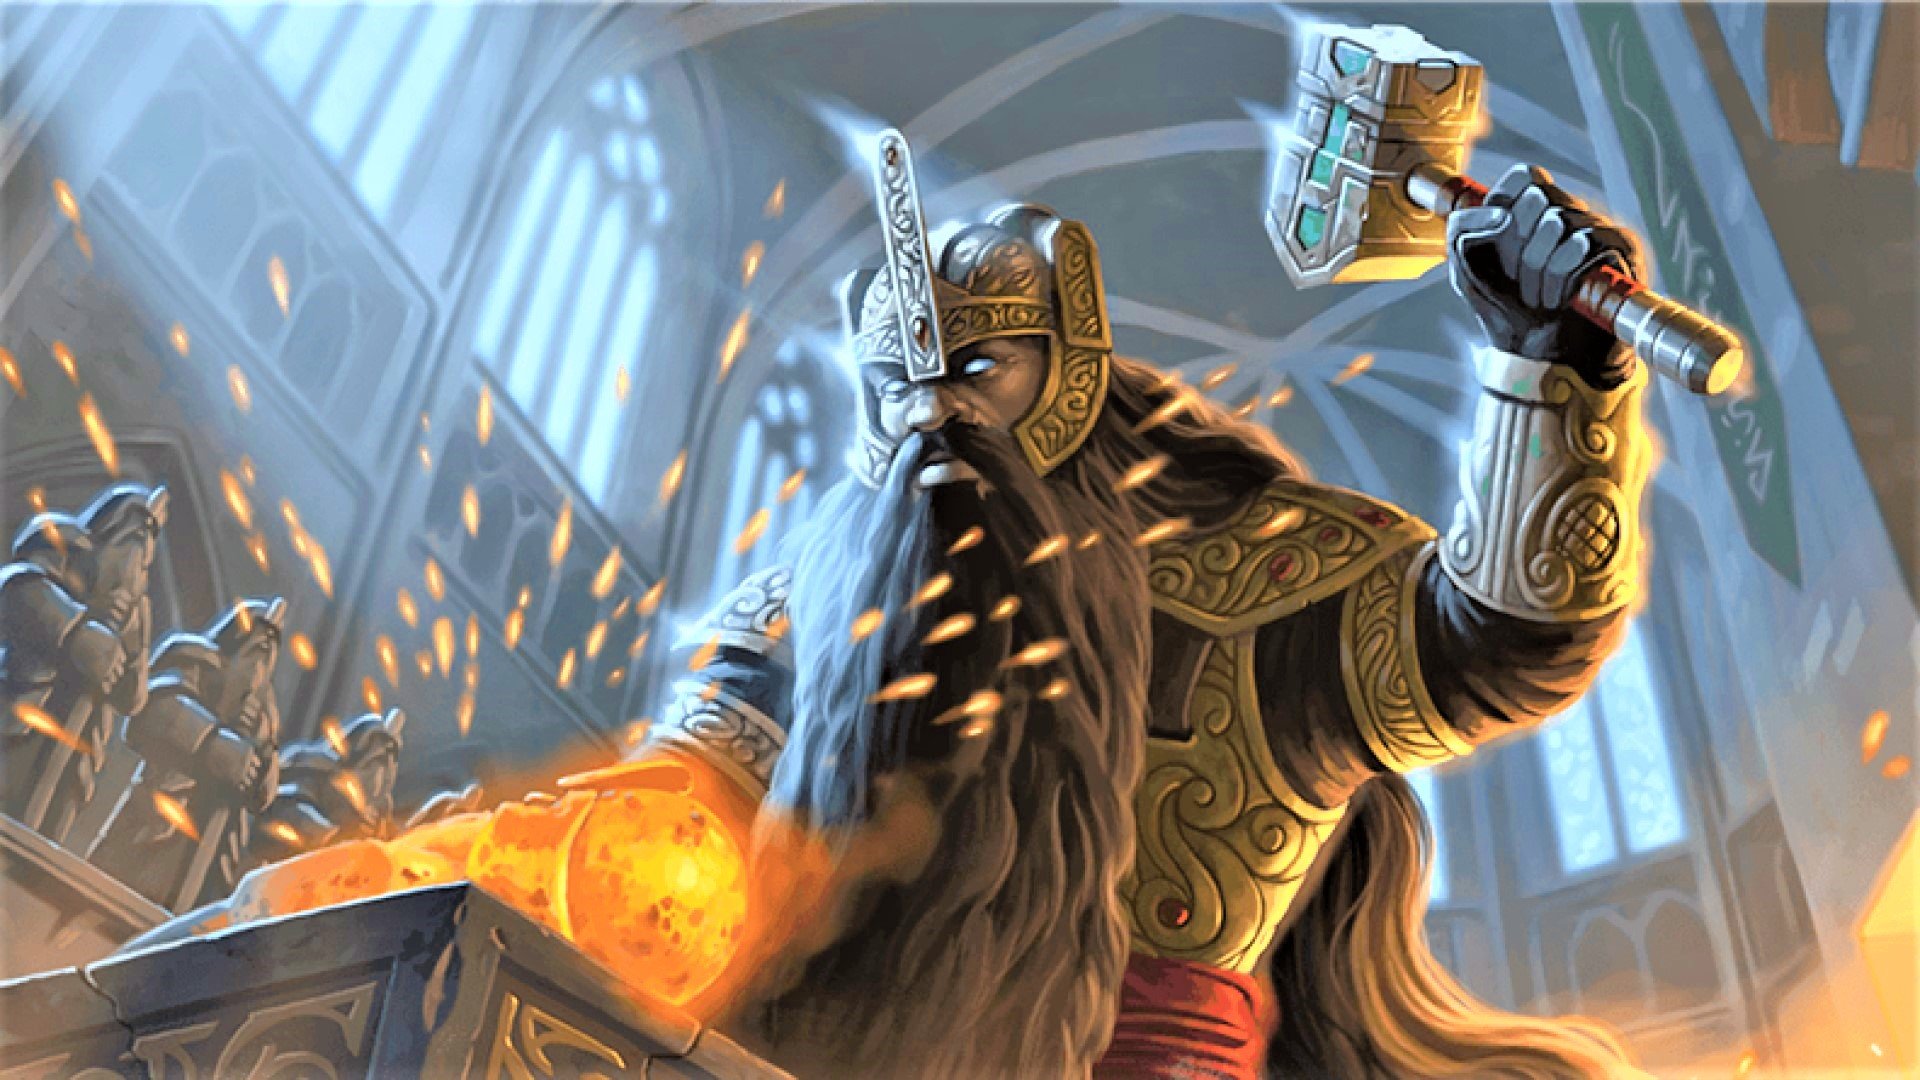 DnD Cleric 5E - Wizards of the Coast artwork showing a dwarven smith working metal